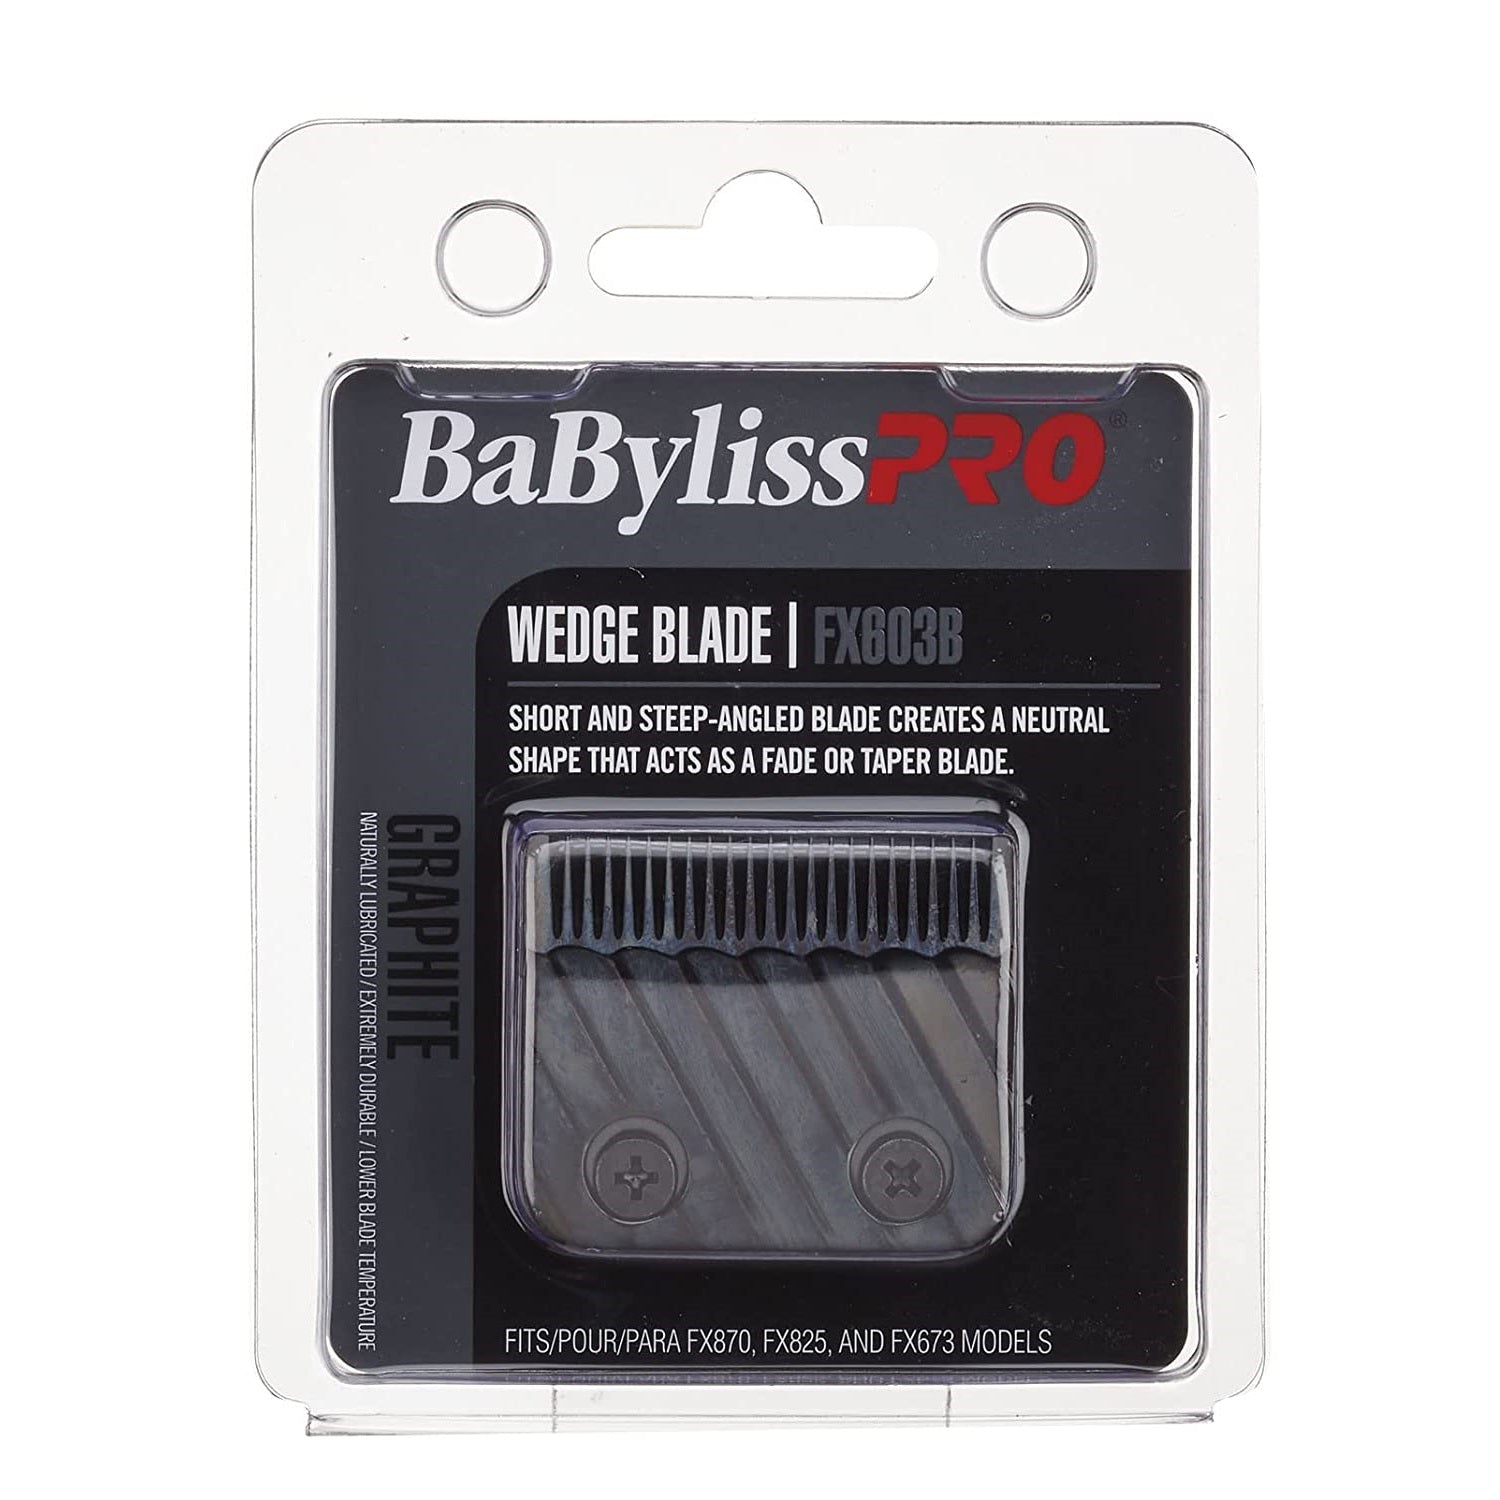 Babyliss PRO Graphite Clipper Replacement Wedge Blade - FX603B